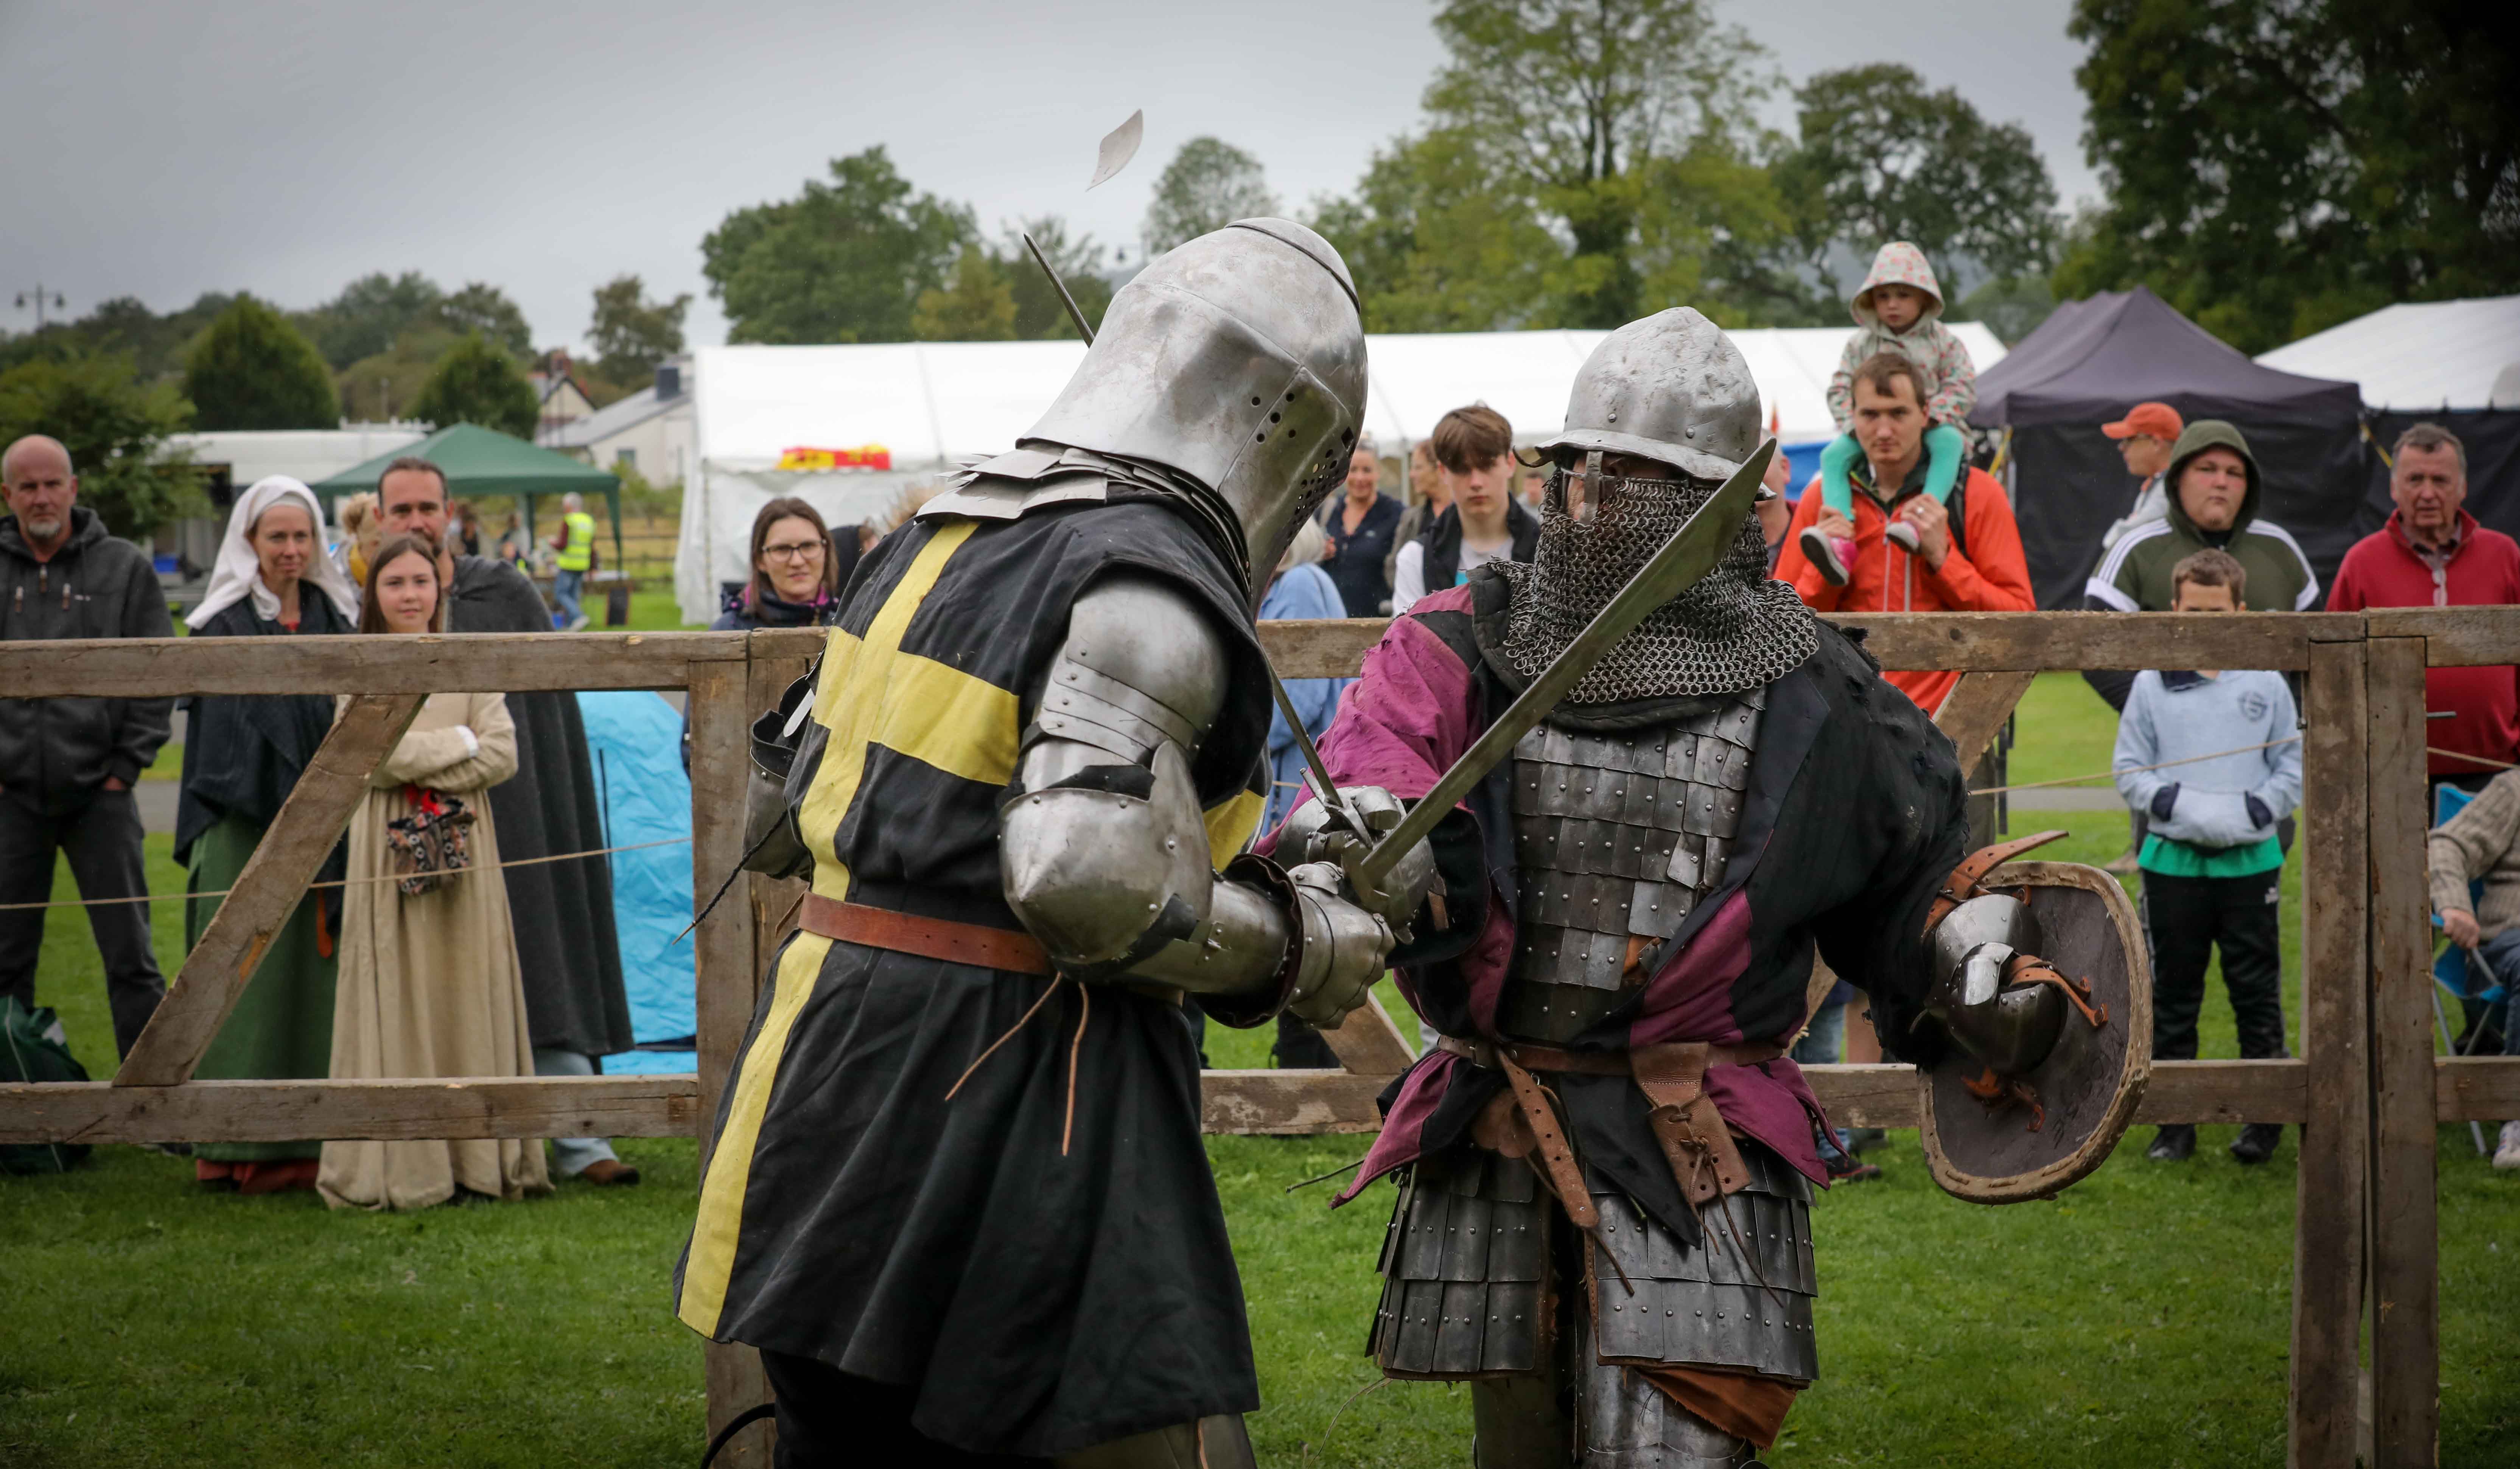 Combat in Corwen as armoured knights do battle at medieval spectacular